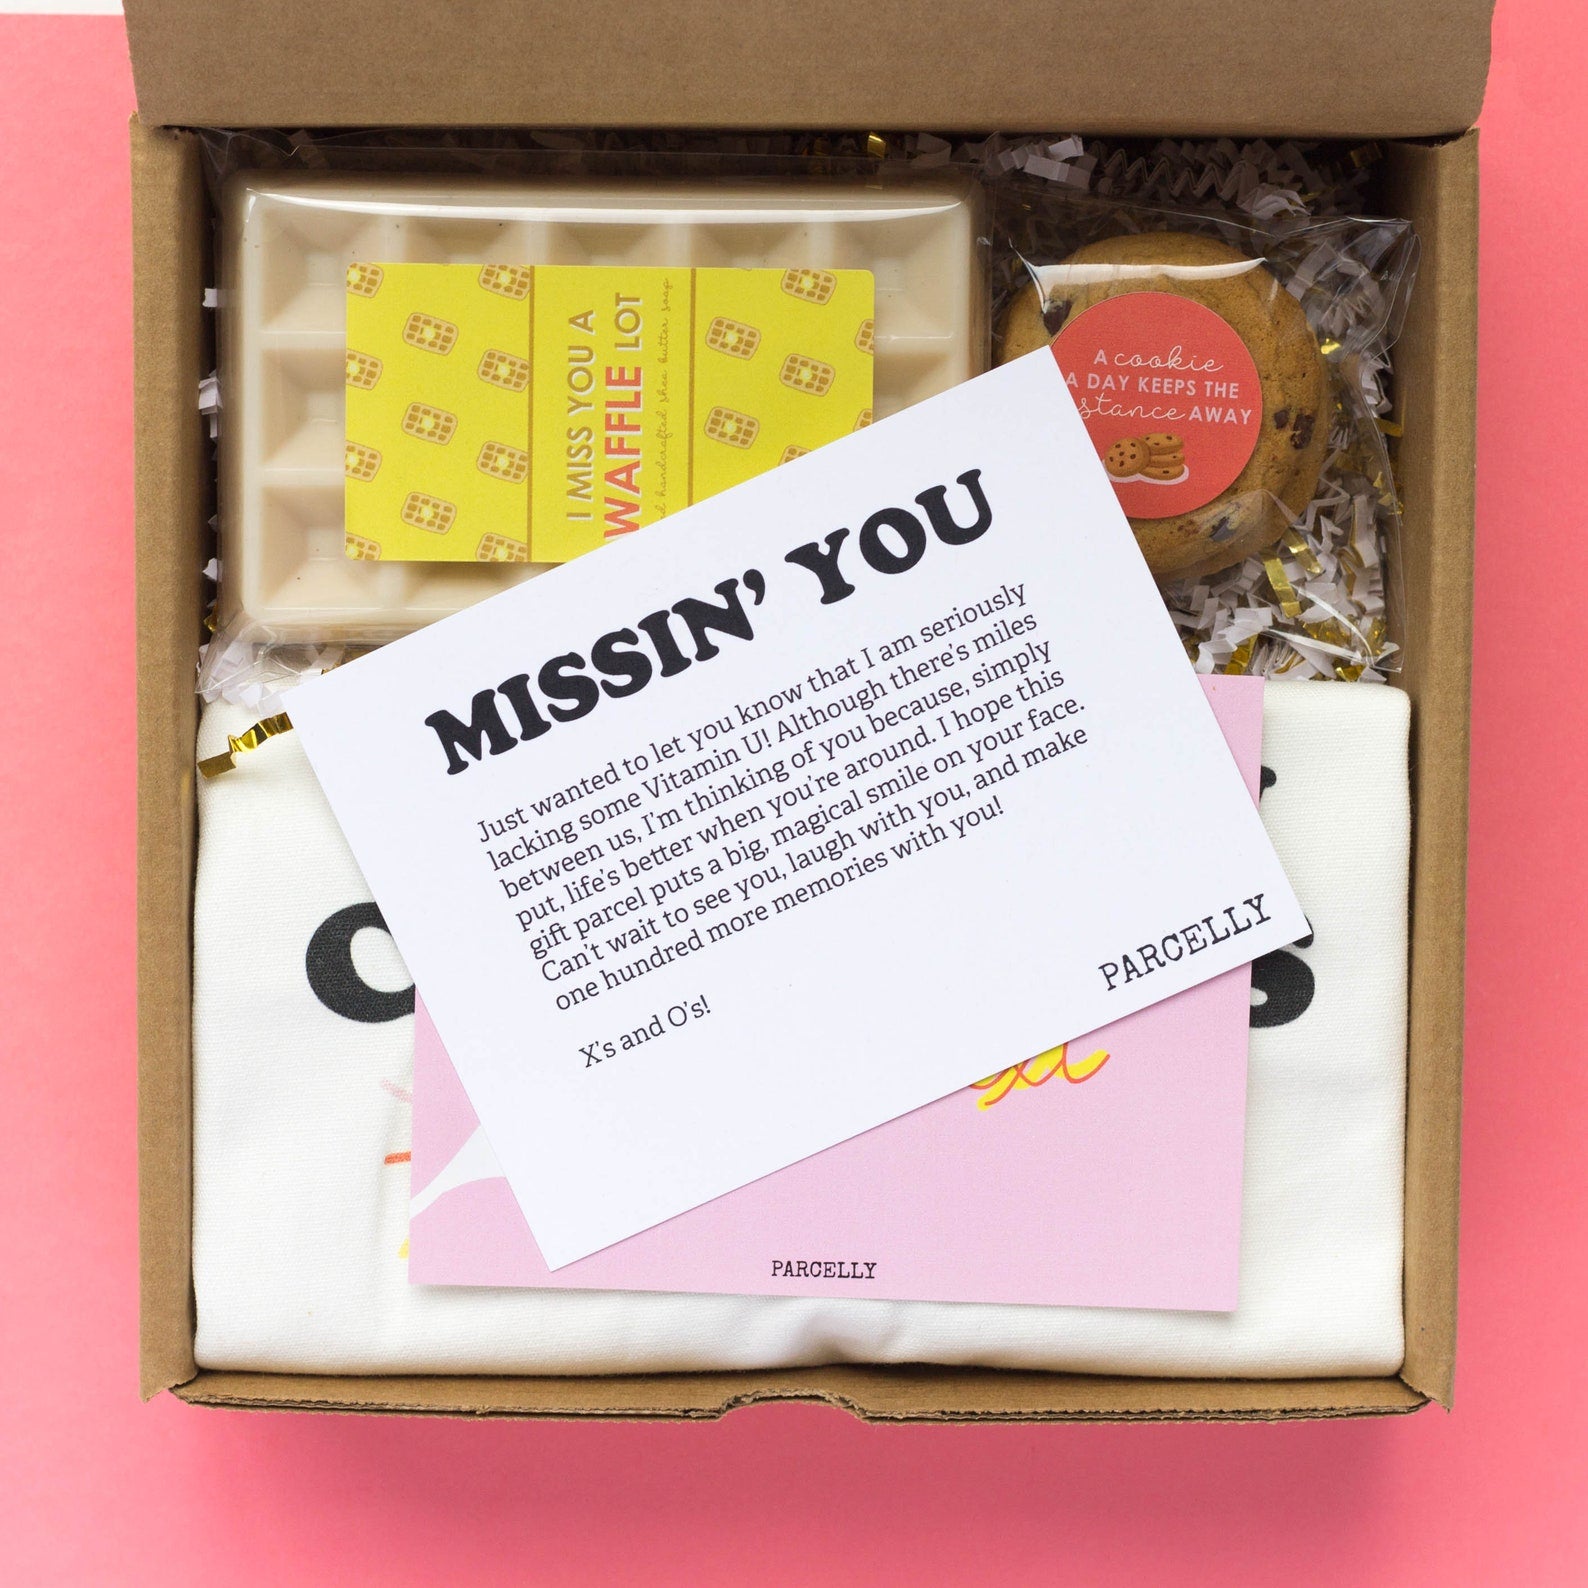 Long Distance Friendship - Gifts For Your Best Friend